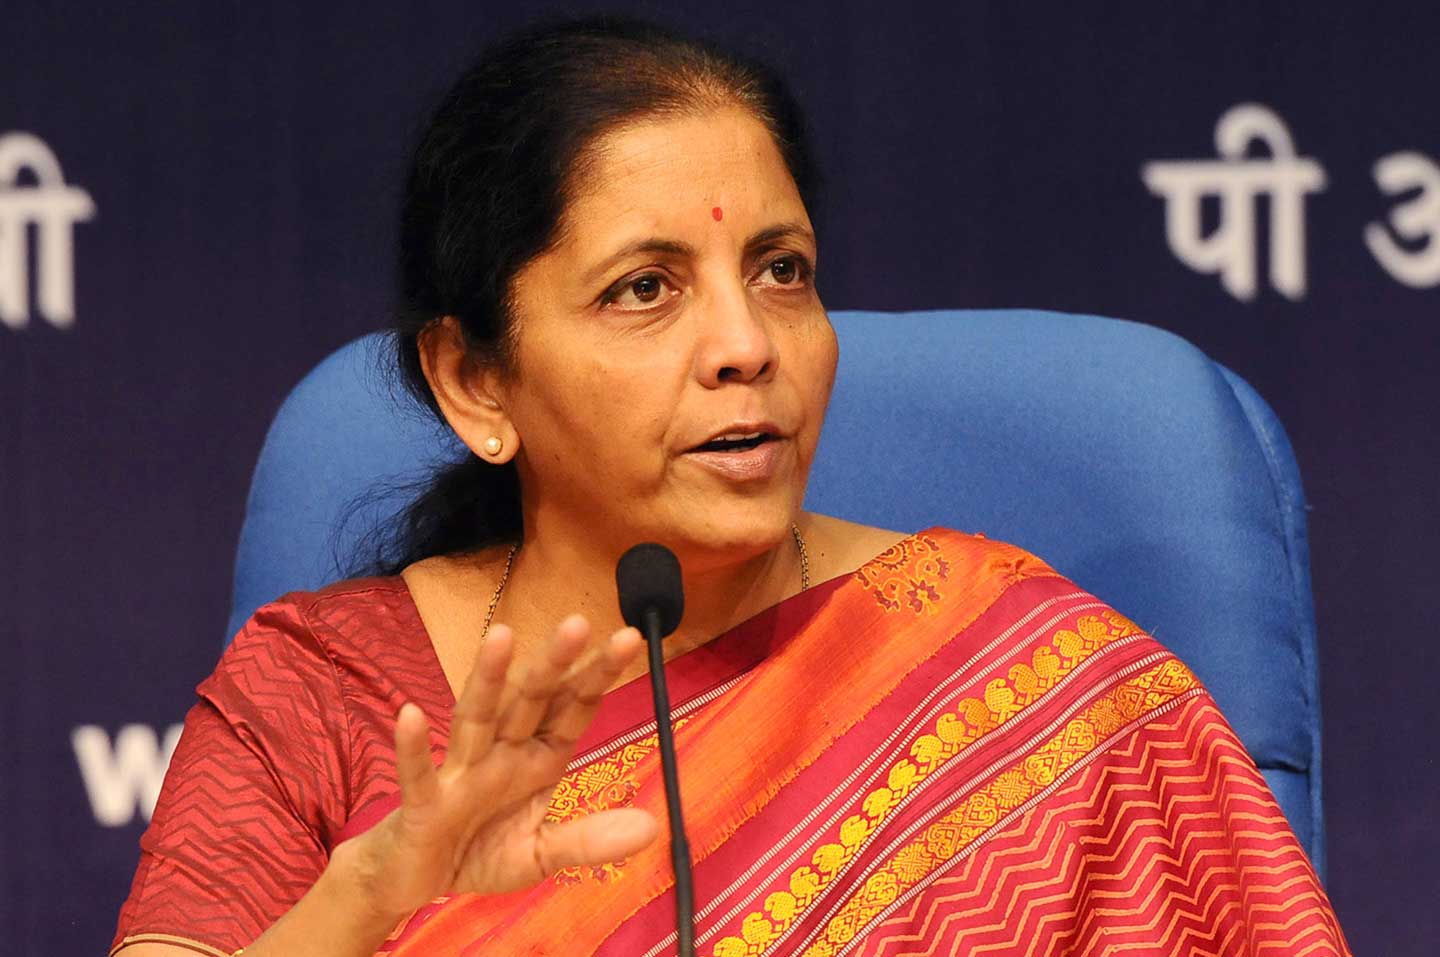 Indian Finance Minister Nirmala Sitharaman speaking at a microphone